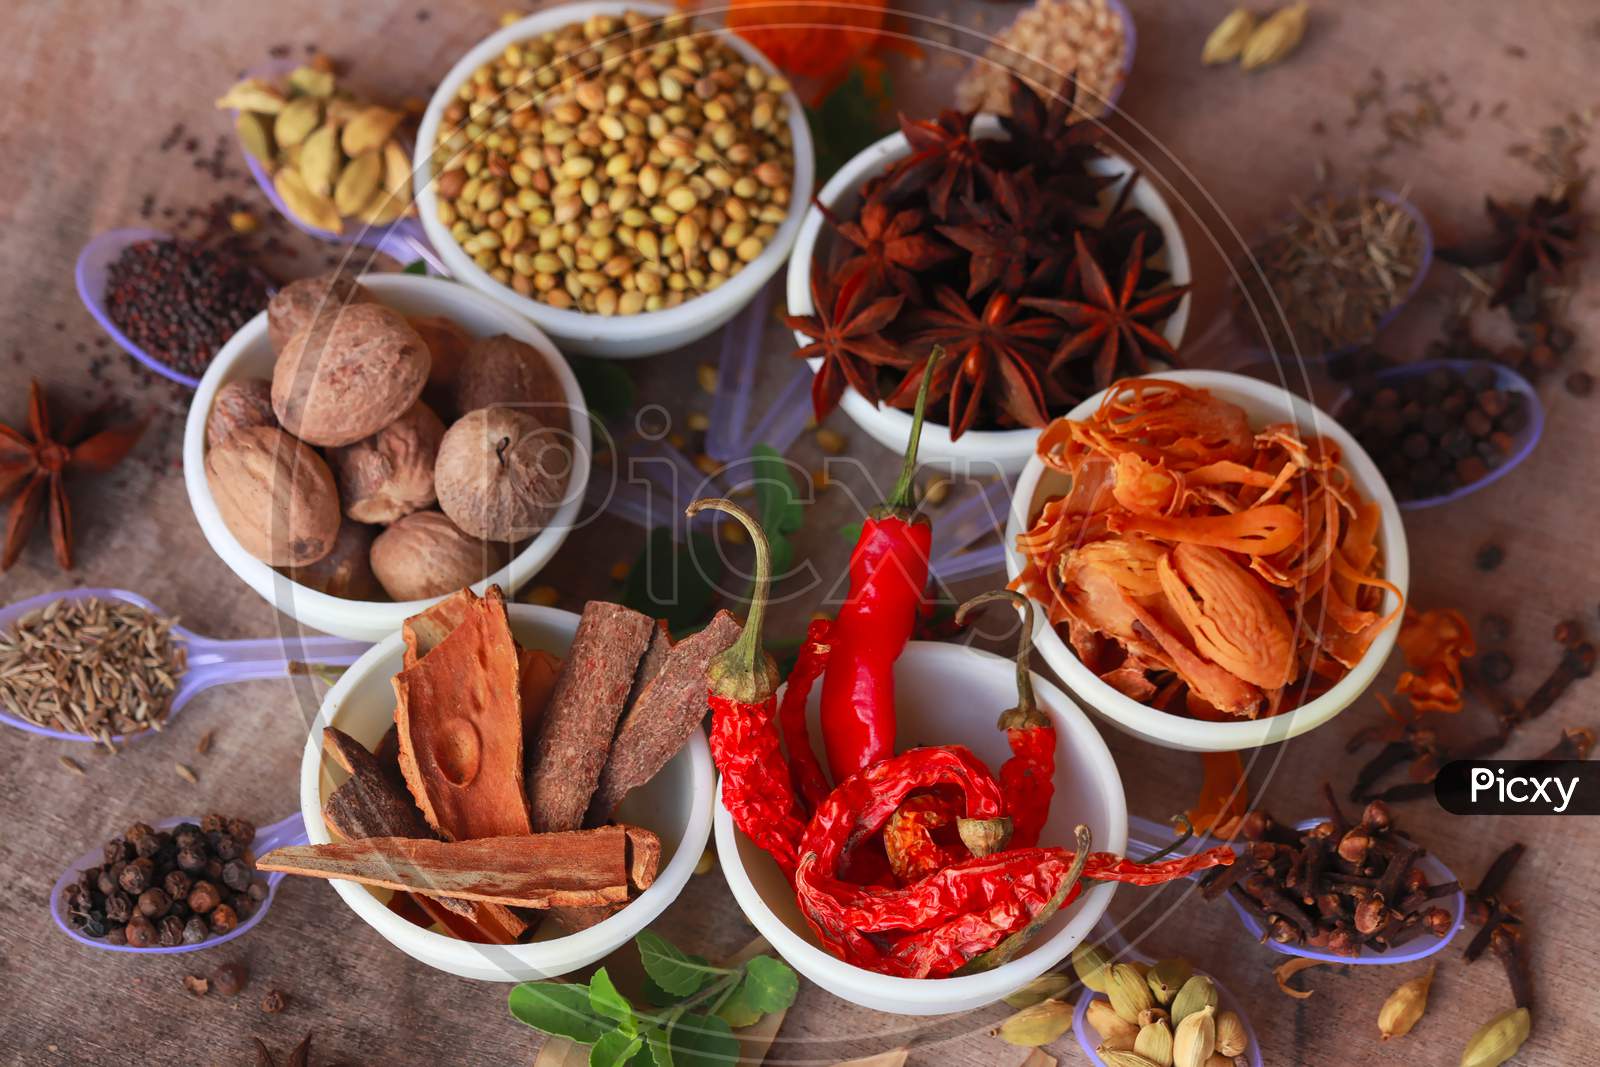 Collection Of Beautiful Indian Spices Rotated On Wooden Table,Assortment Spices And Herbs For Cooking,Food And Cuisine Ingredients,Various Spices Collection,